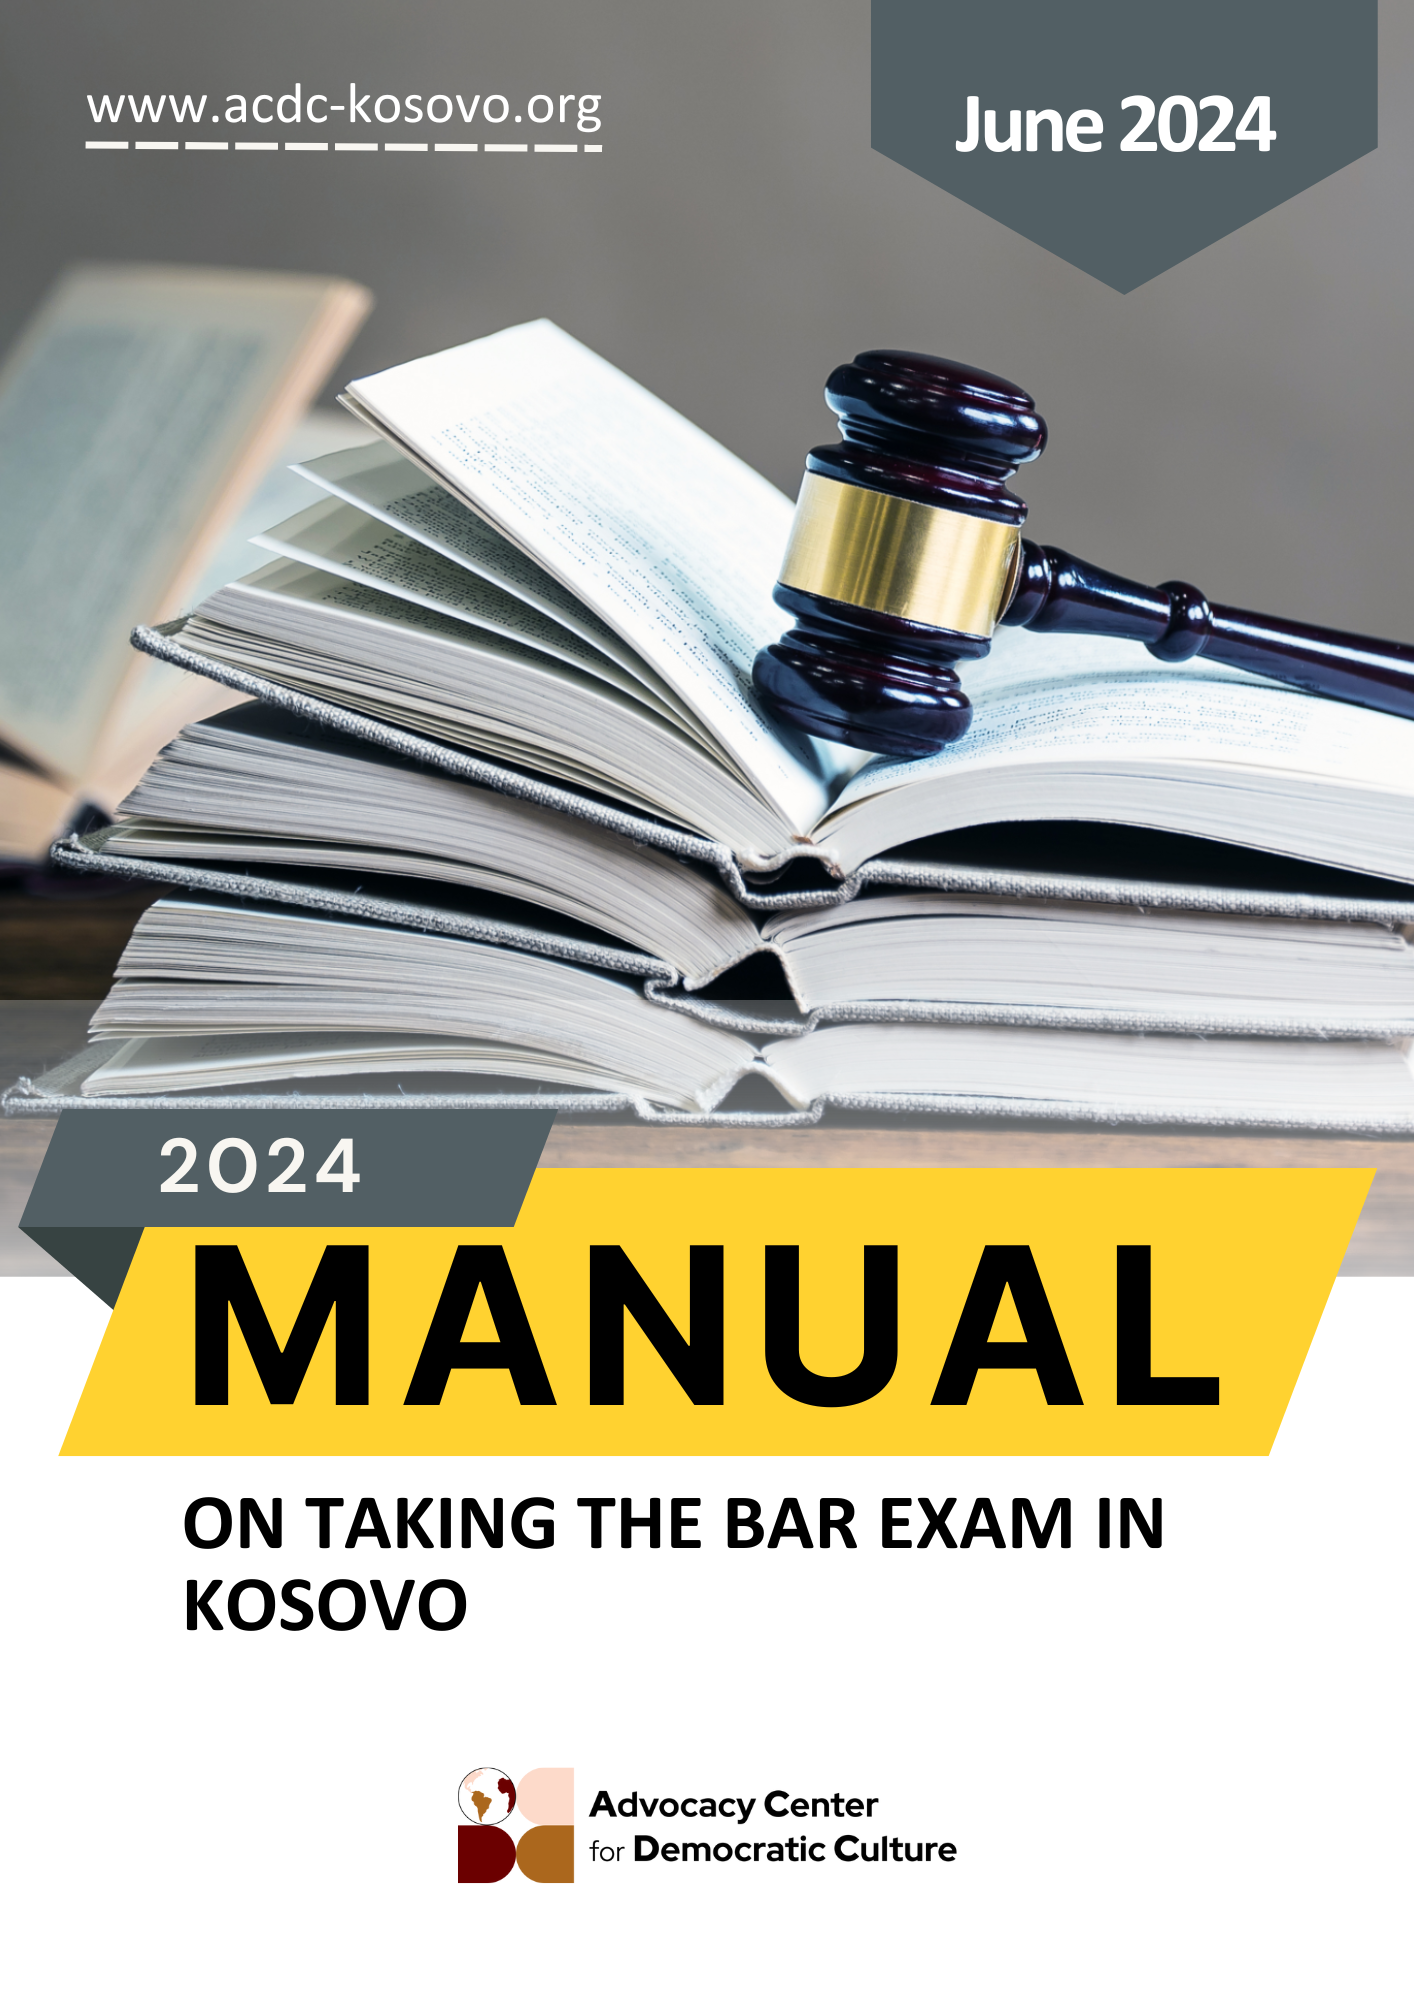 Manual on taking the Bar Exam in Kosovo - June 2024